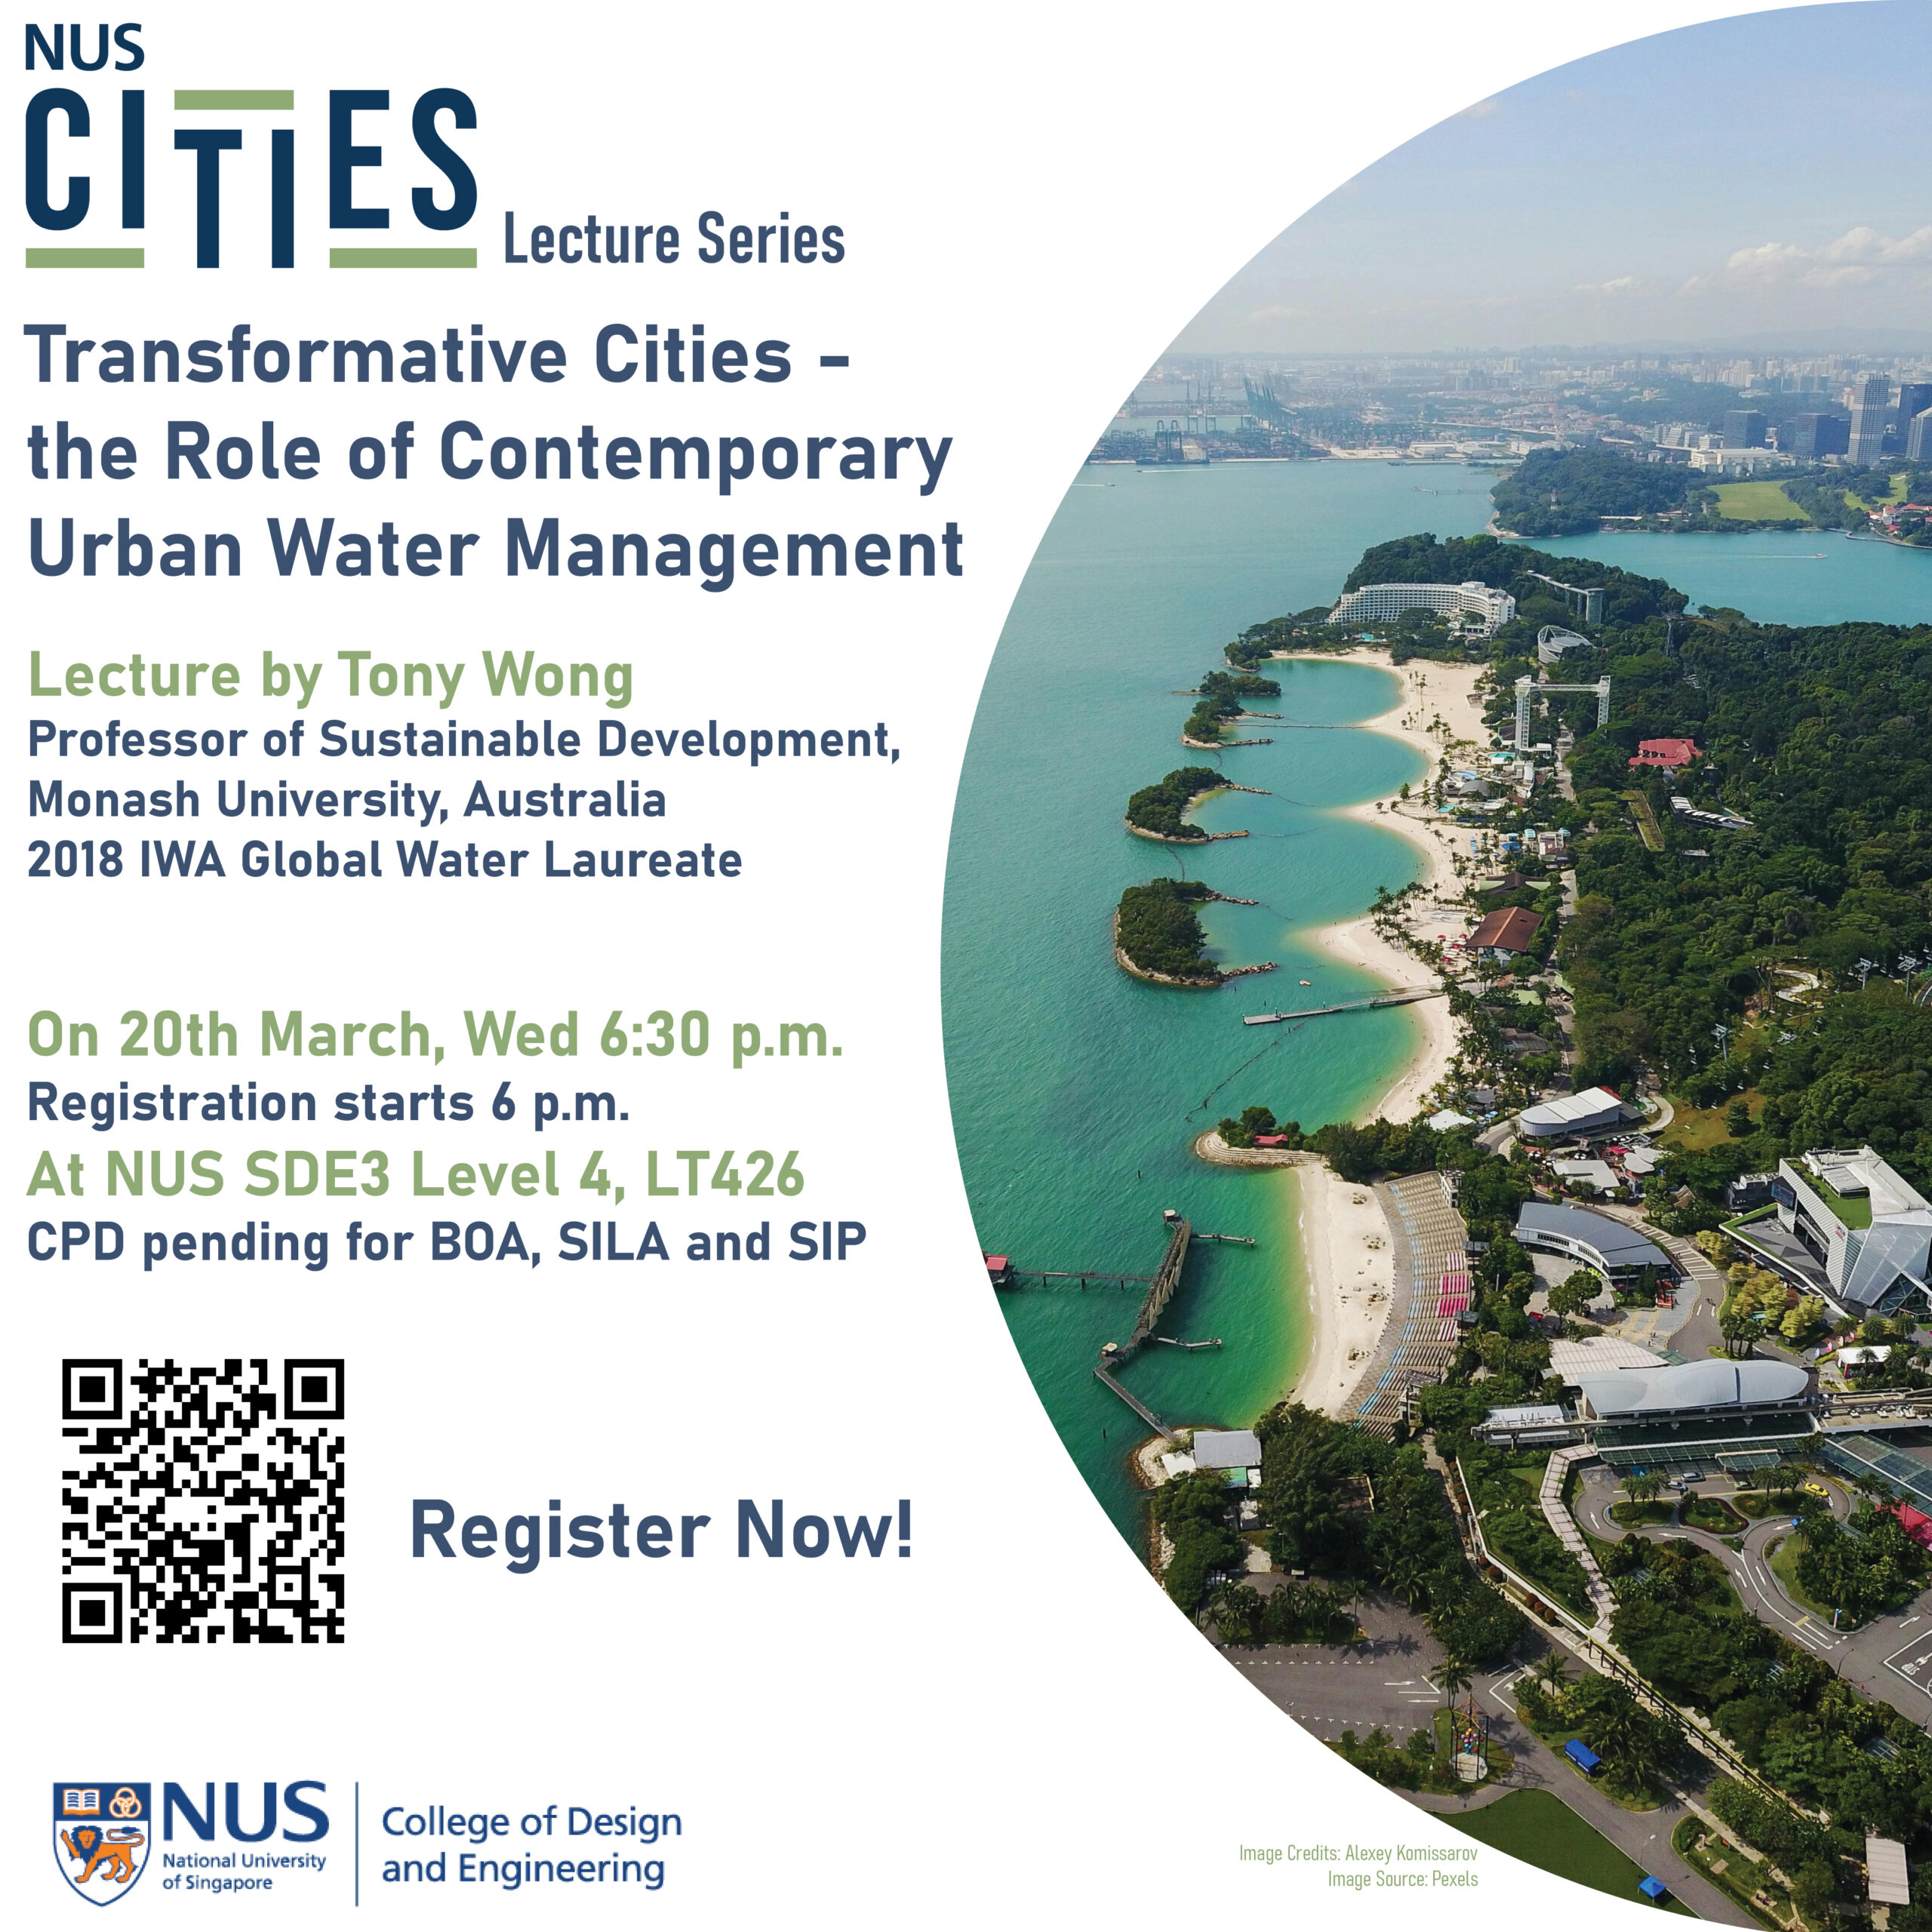 NUS Cities Lecture Series 12: Transformative Cities - the Role of Contemporary Urban Water Management